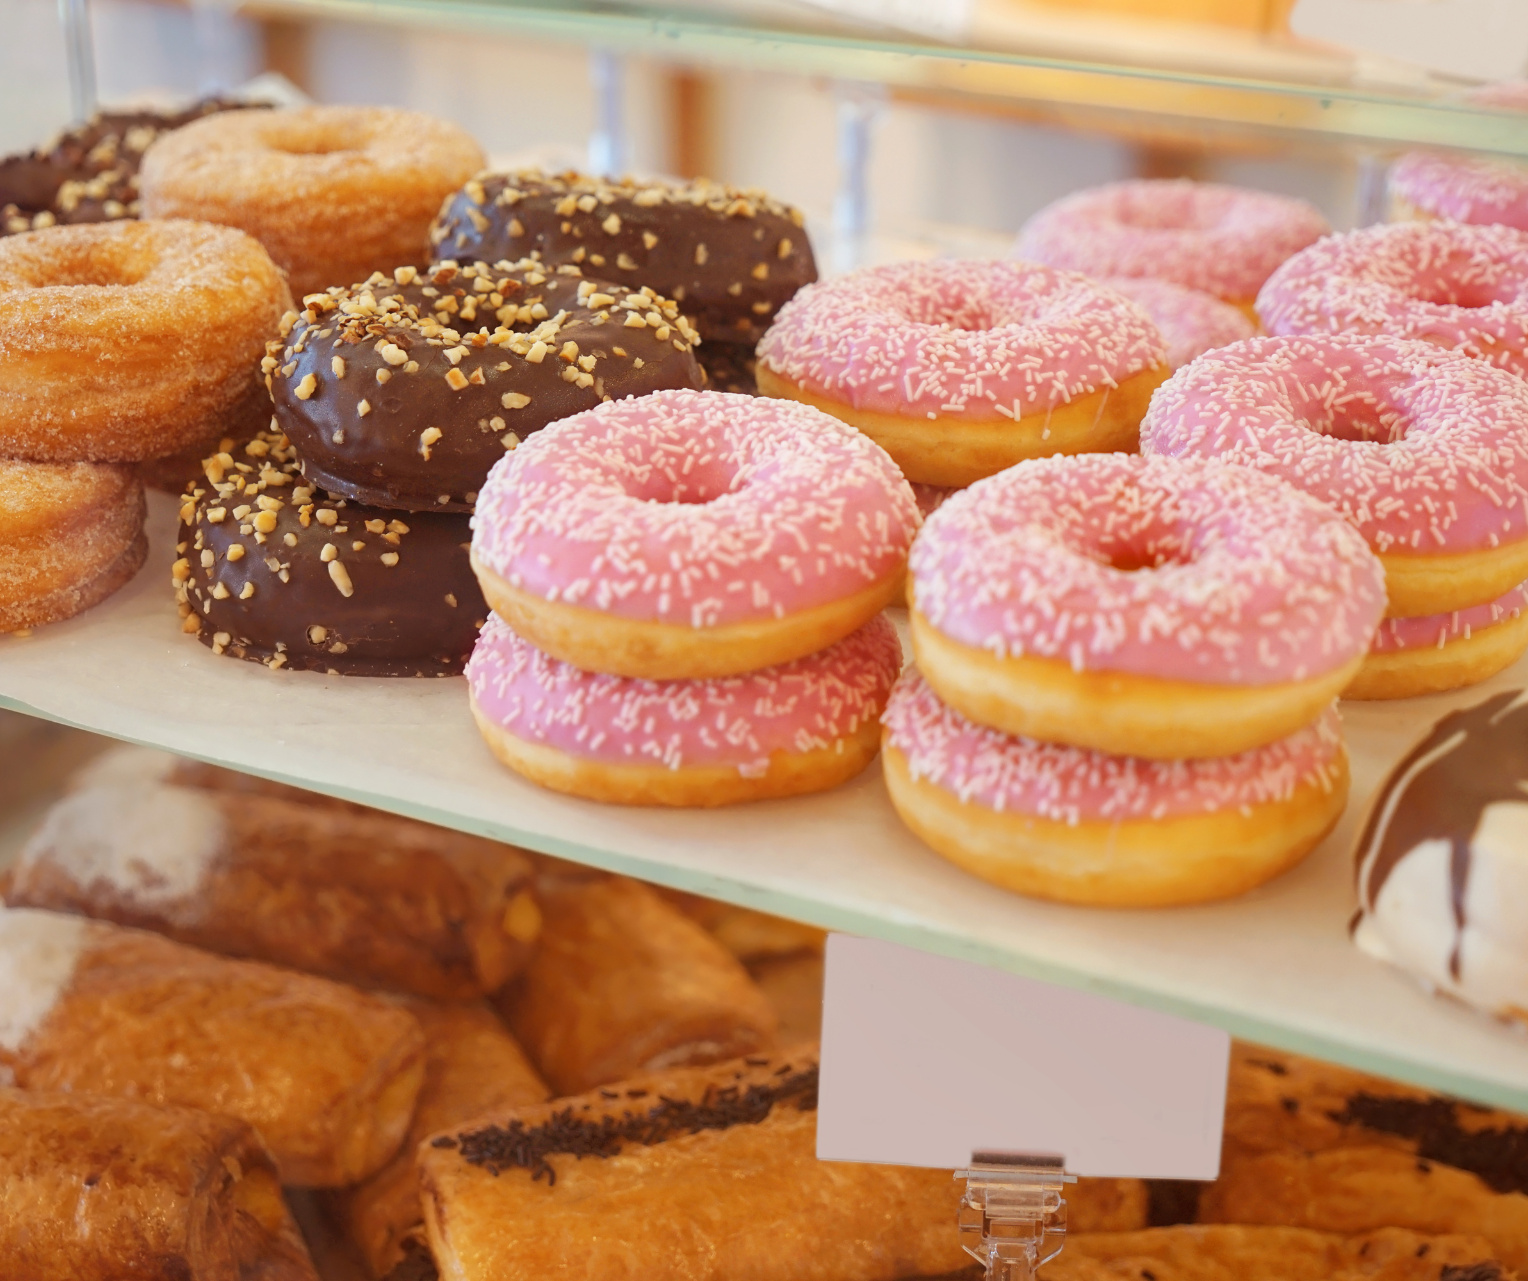 Hottest Location in Collin County, Donut Shop for Sale!